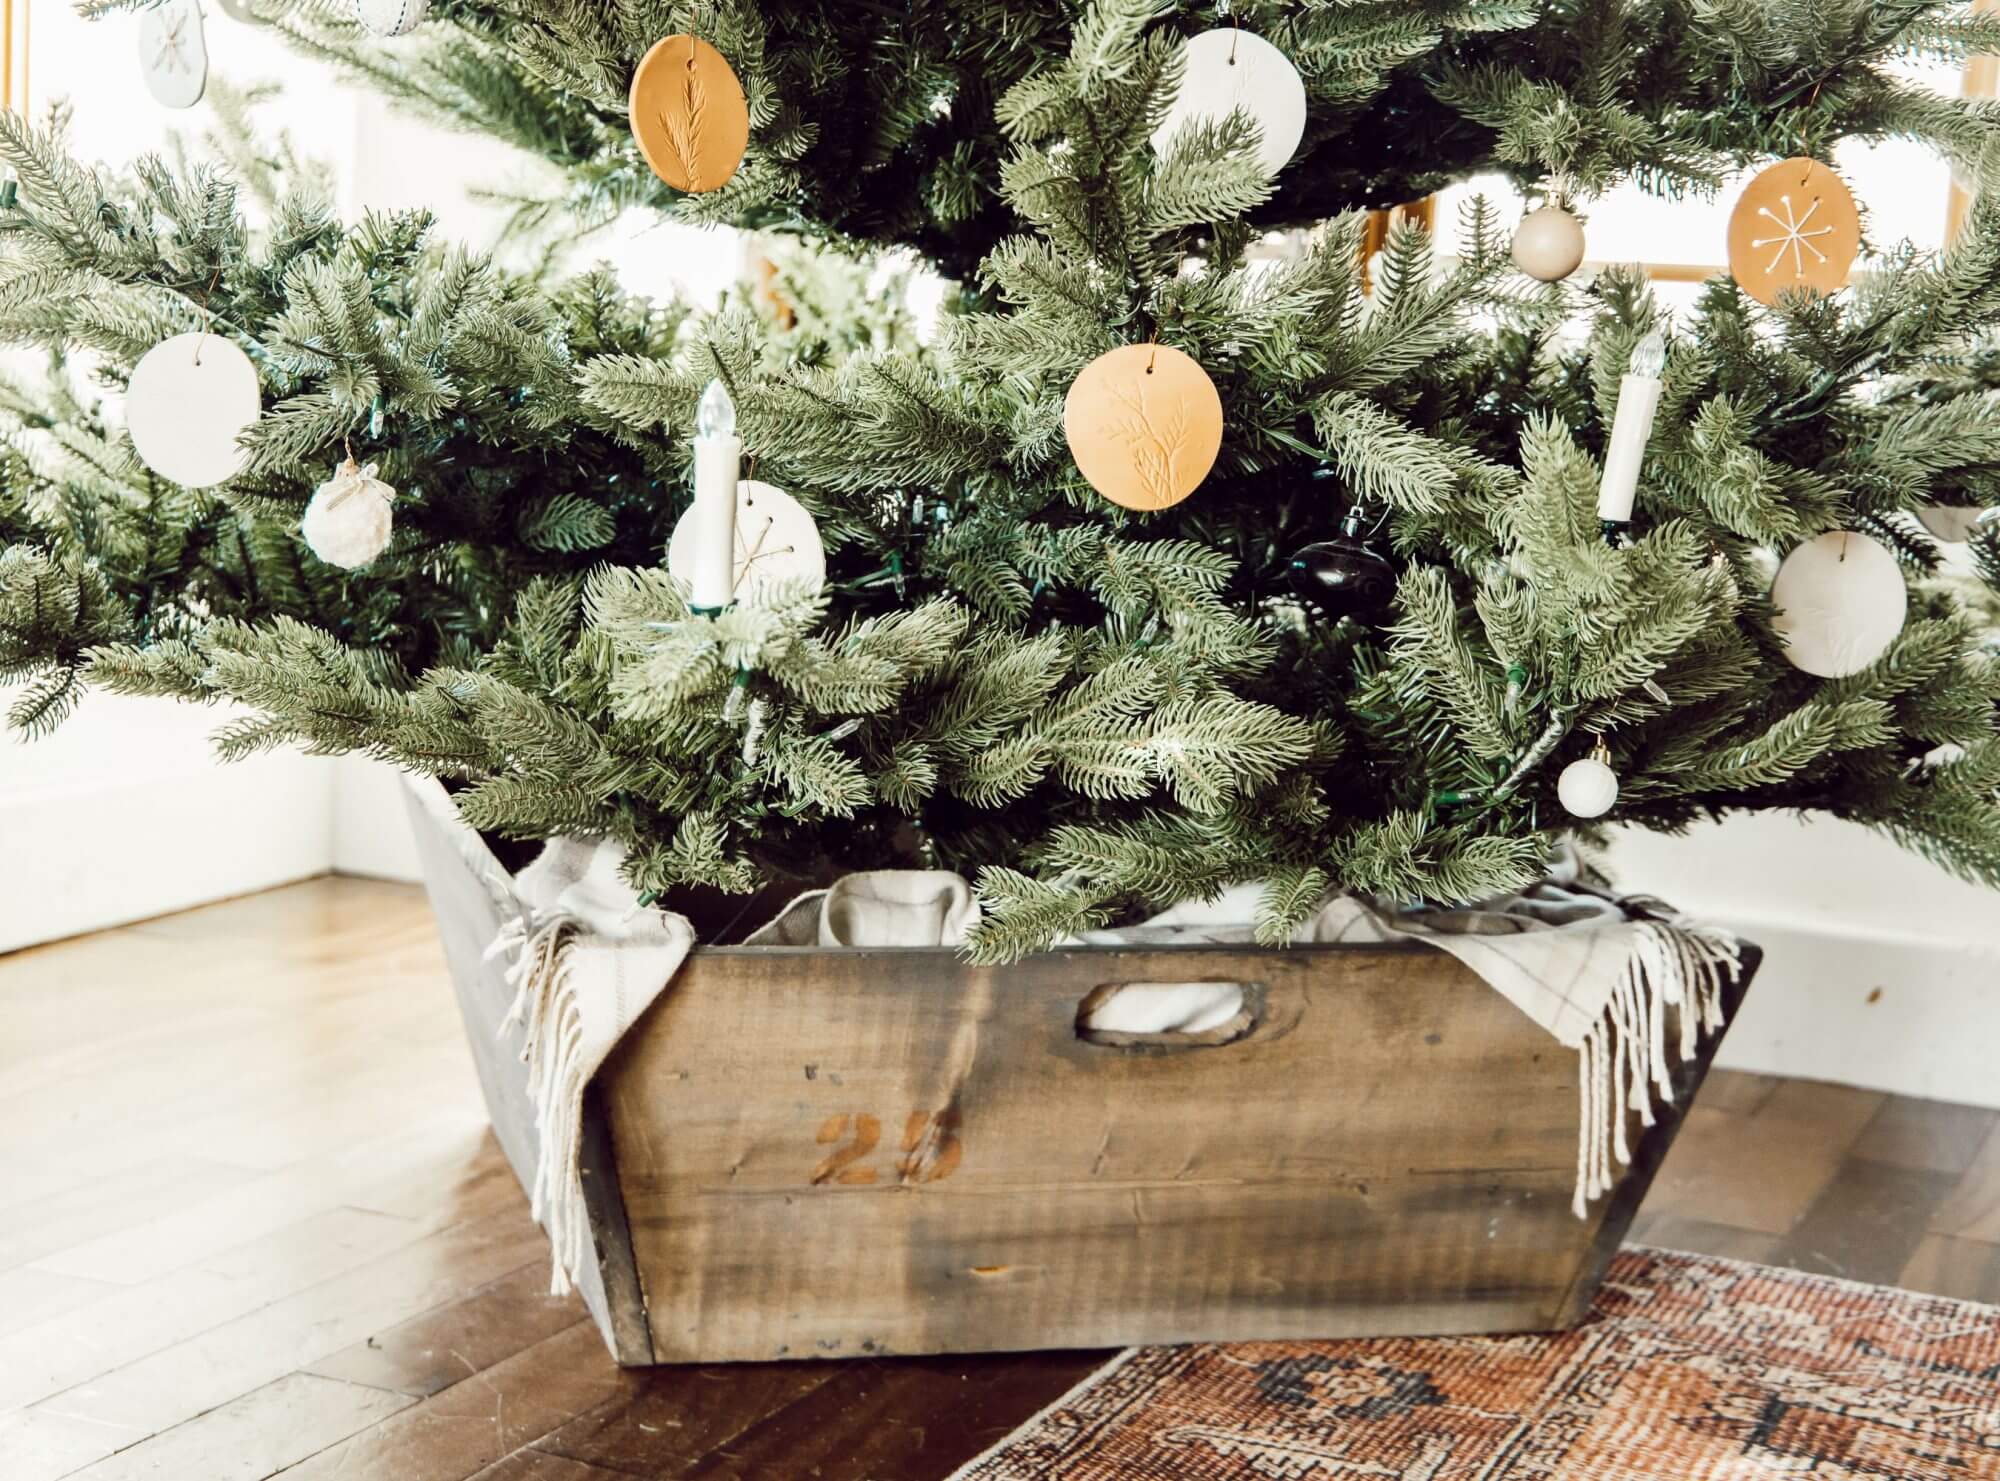 Vintage Crate Inspired DIY Wooden Christmas Tree Collar